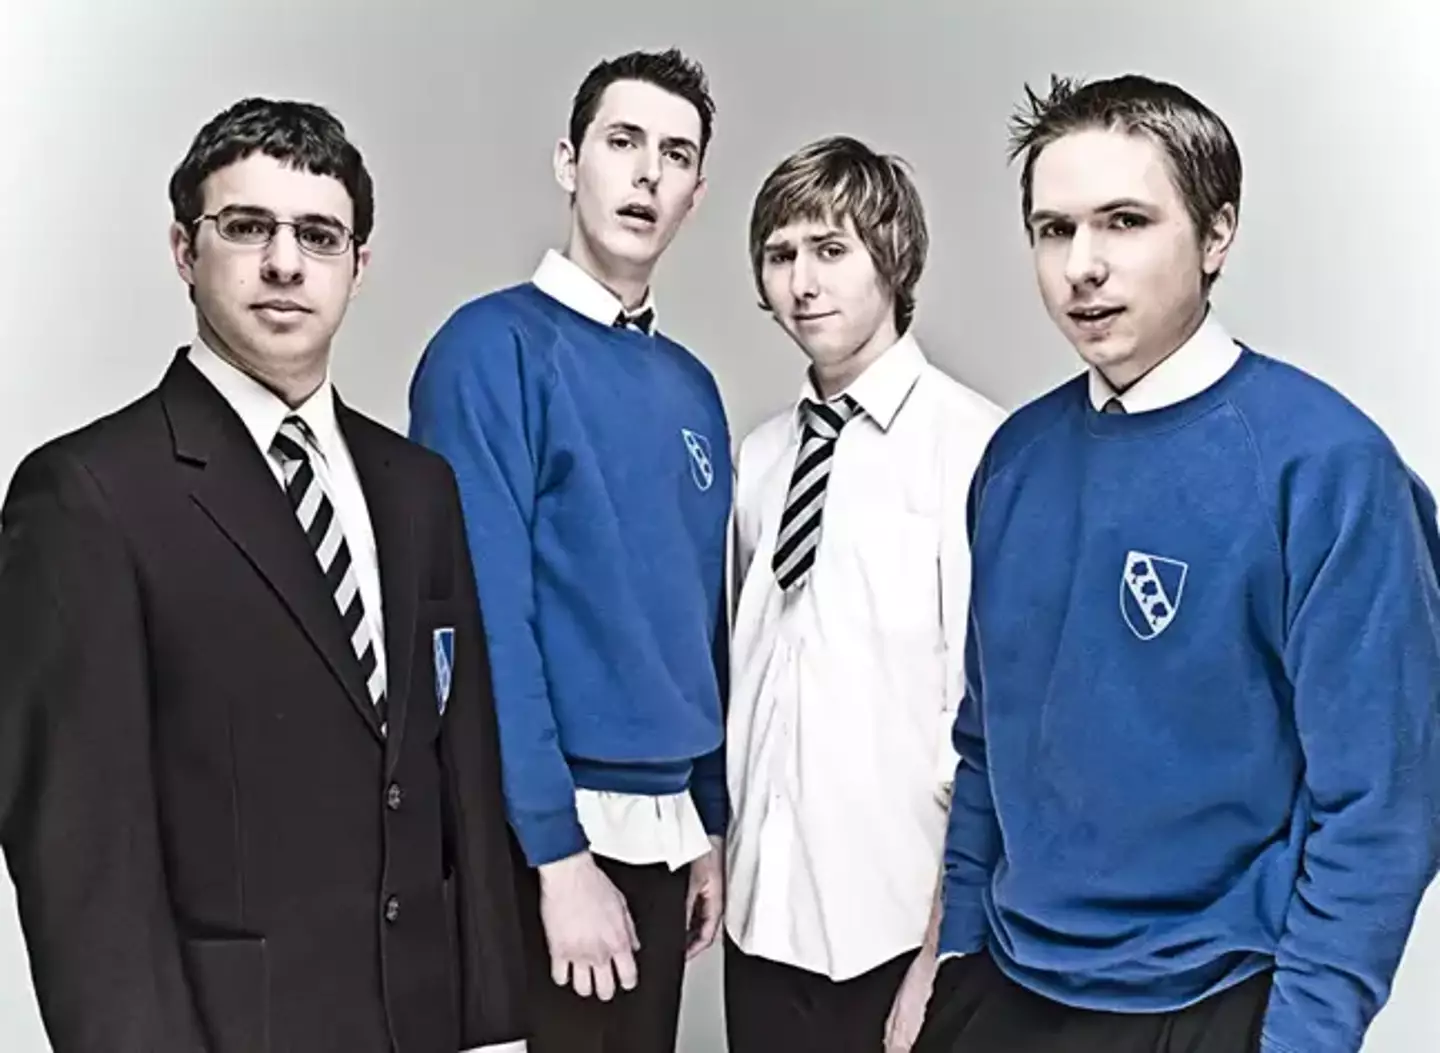 The Inbetweeners tried a pilot episode called Baggy Trousers with James Buckley in a different role.